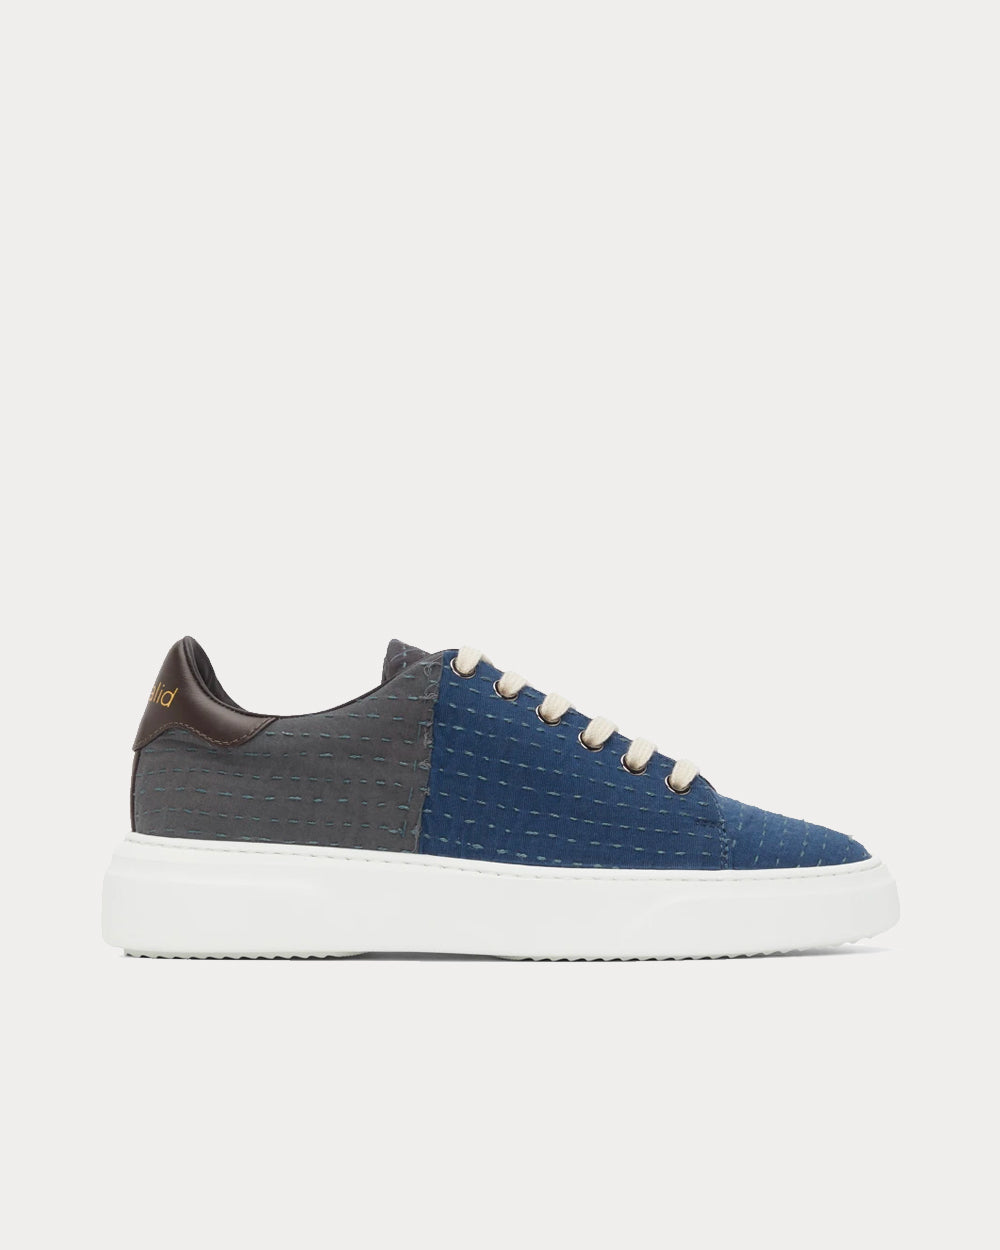 By Walid - Round Toe Lace-up Petrol / White Low Top Sneakers